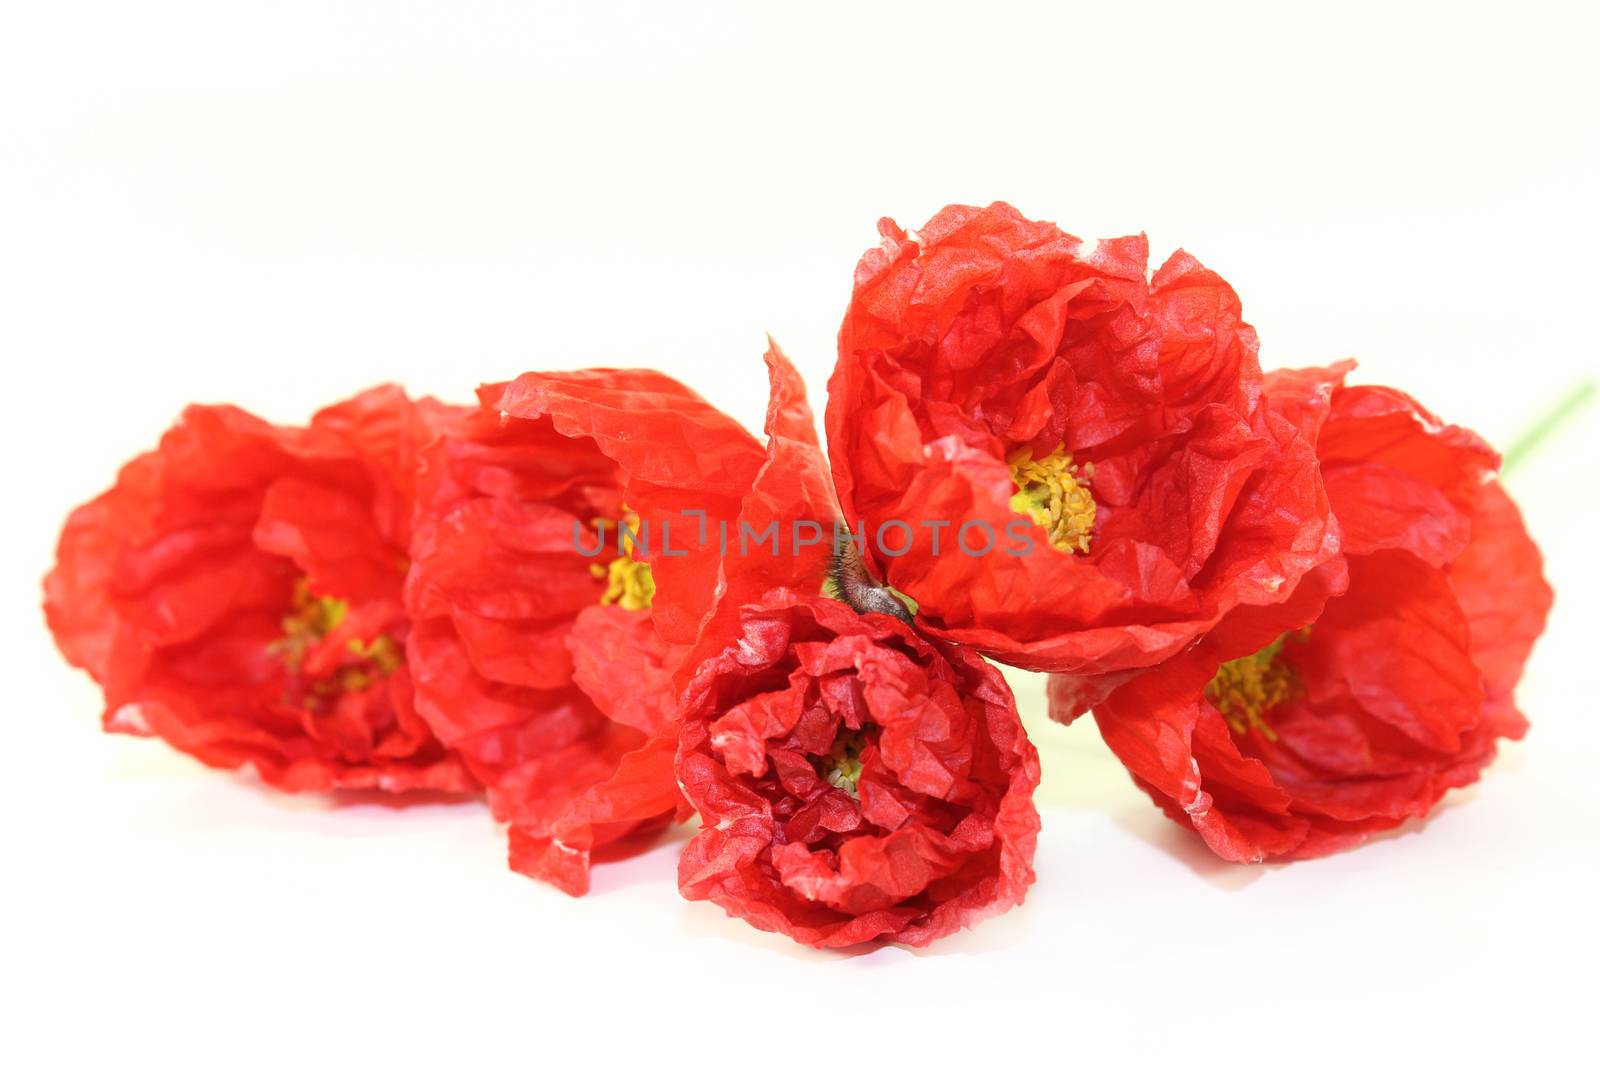 Red Iceland poppy flowers on a bright background
